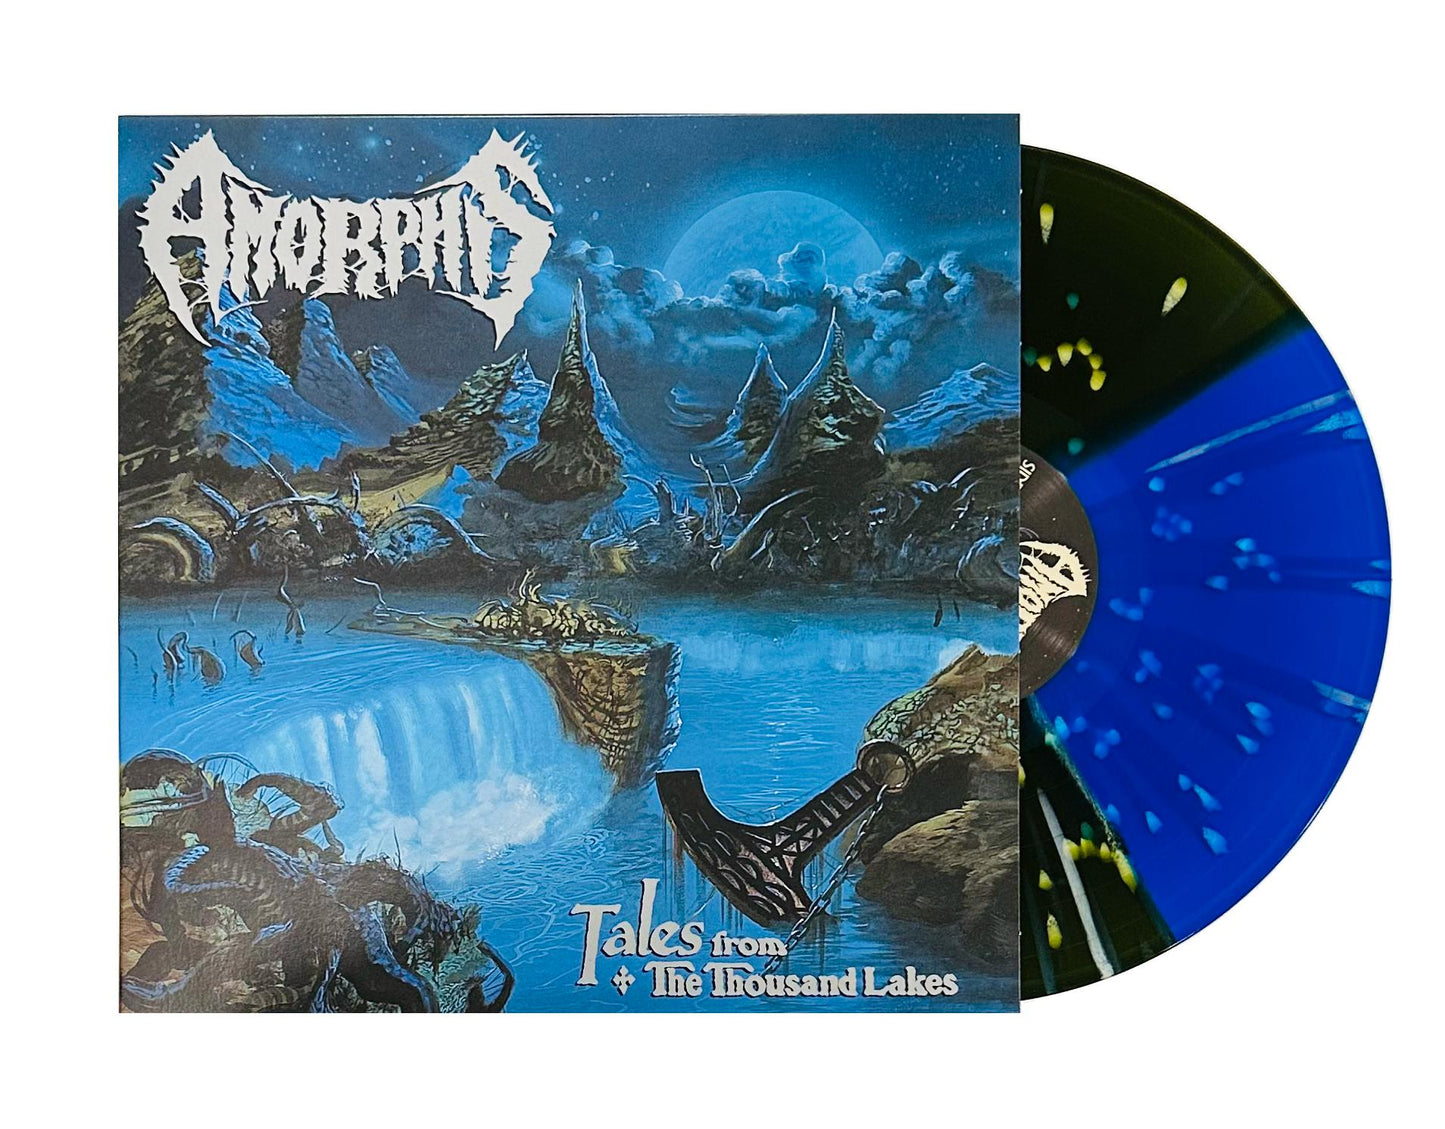 Amorphis - Tales from the Thousand Lakes LP (color vinyl)